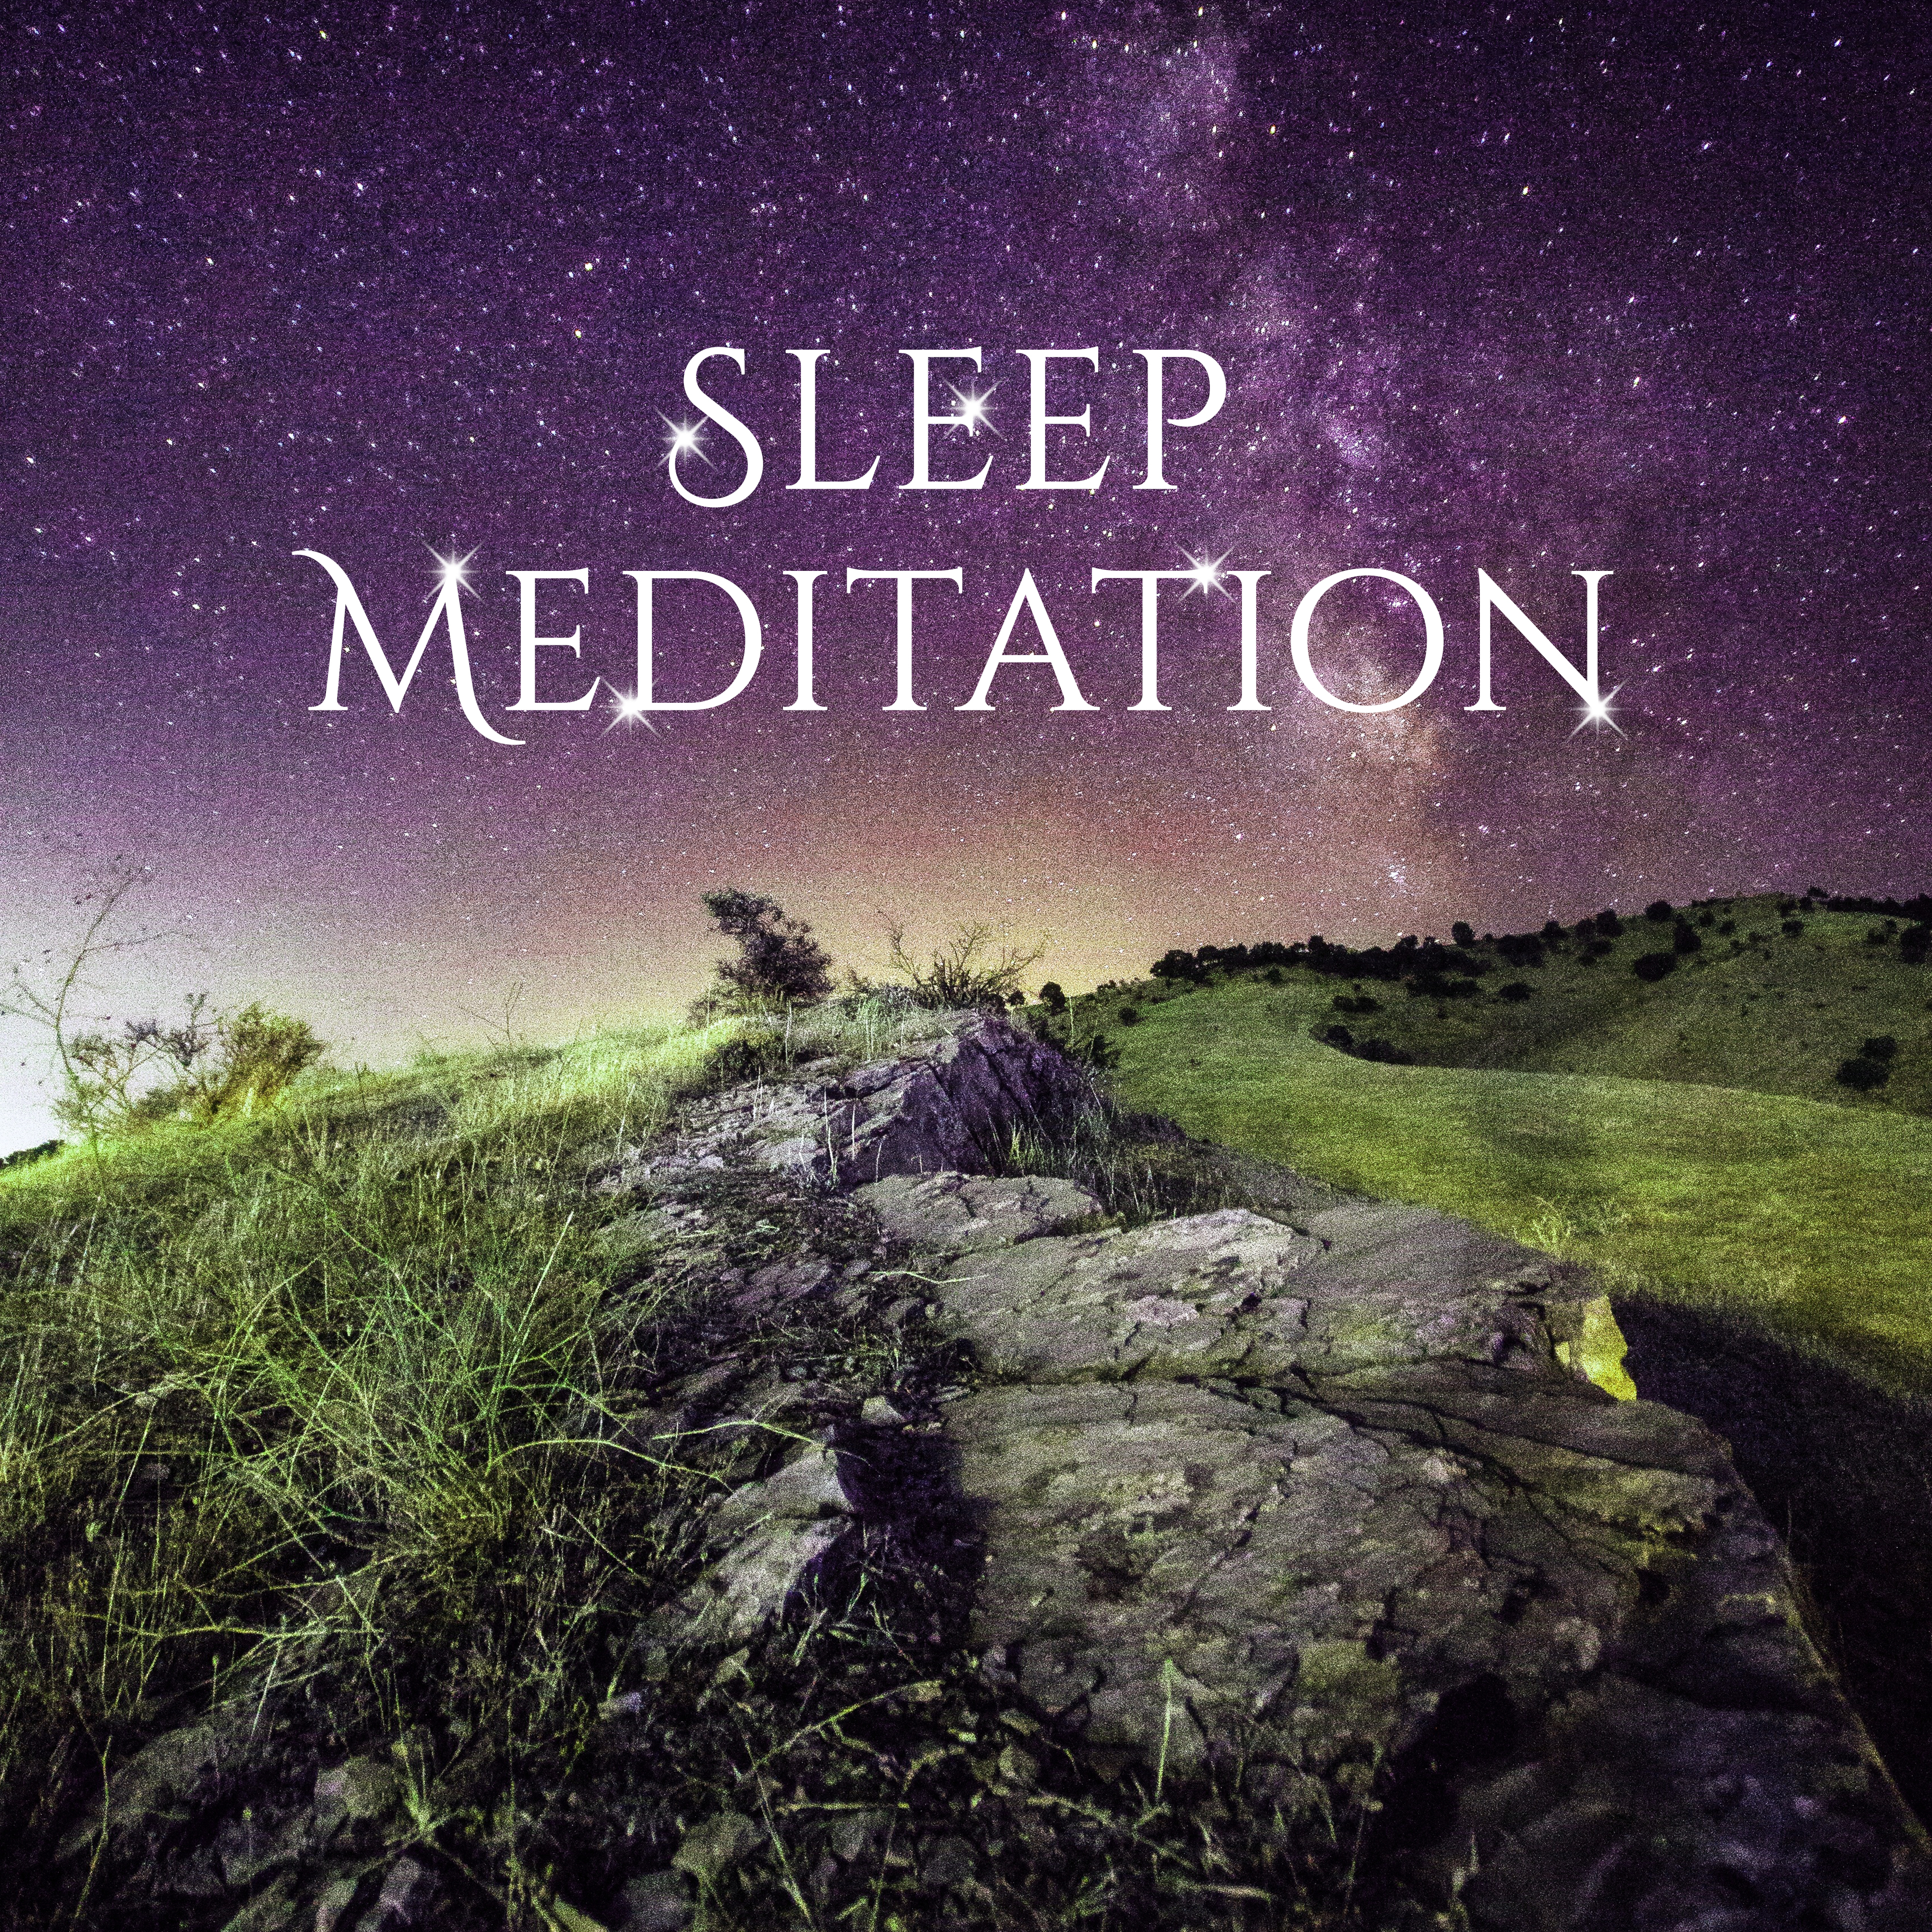 Sleep Meditation  Nature Sounds, Calming New Age Music, Relaxation, Sleep, Healing Bliss Therapy